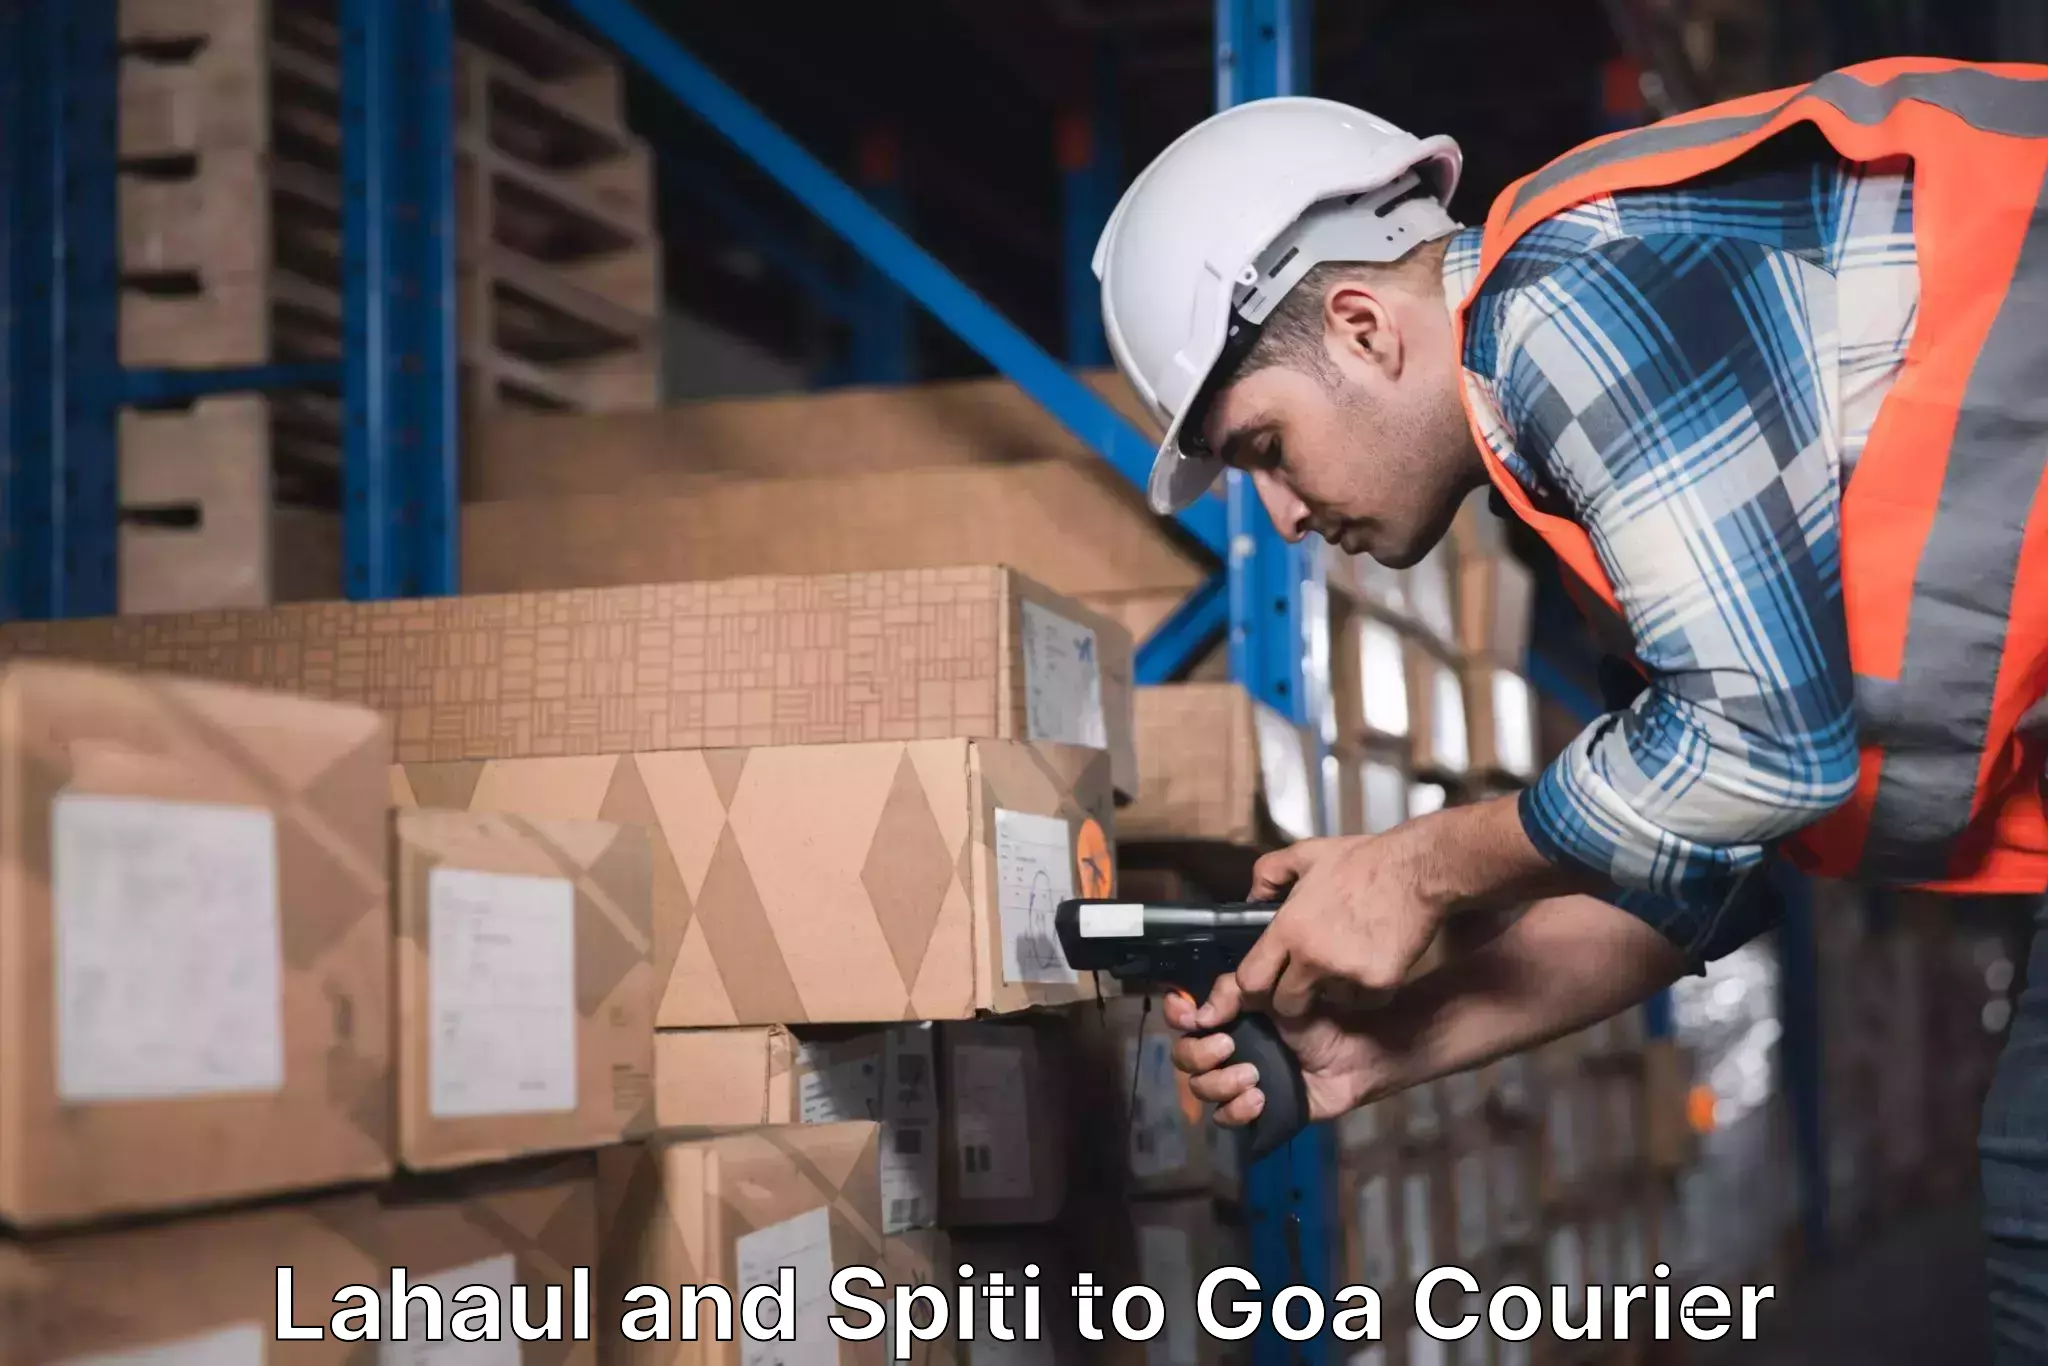 Efficient cargo services Lahaul and Spiti to South Goa